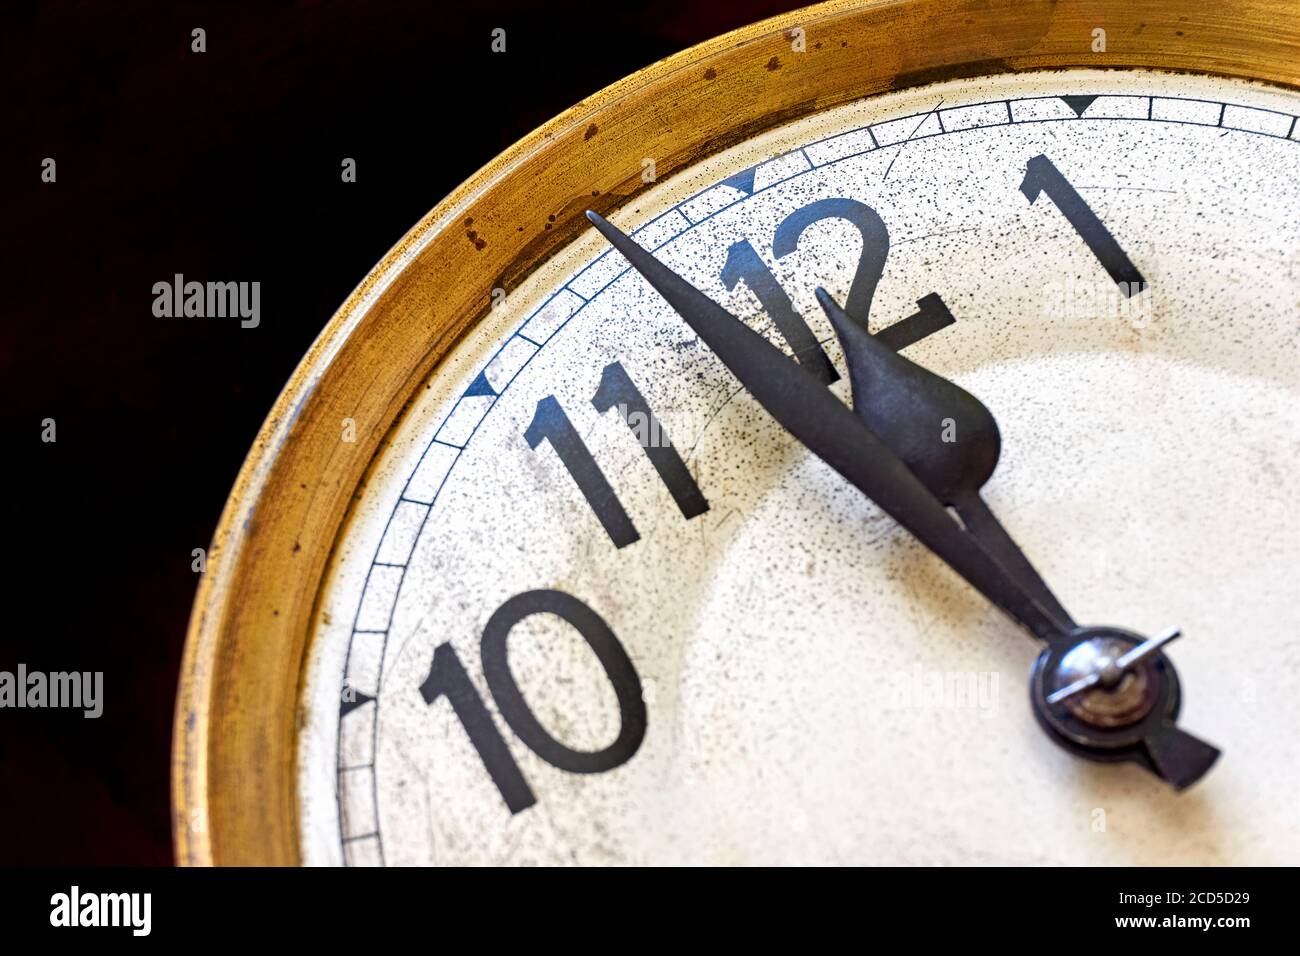 Old vintage clock shows 2 minutes to 12 o'clock against a black background. New year's eve or countdown concept. Stock Photo